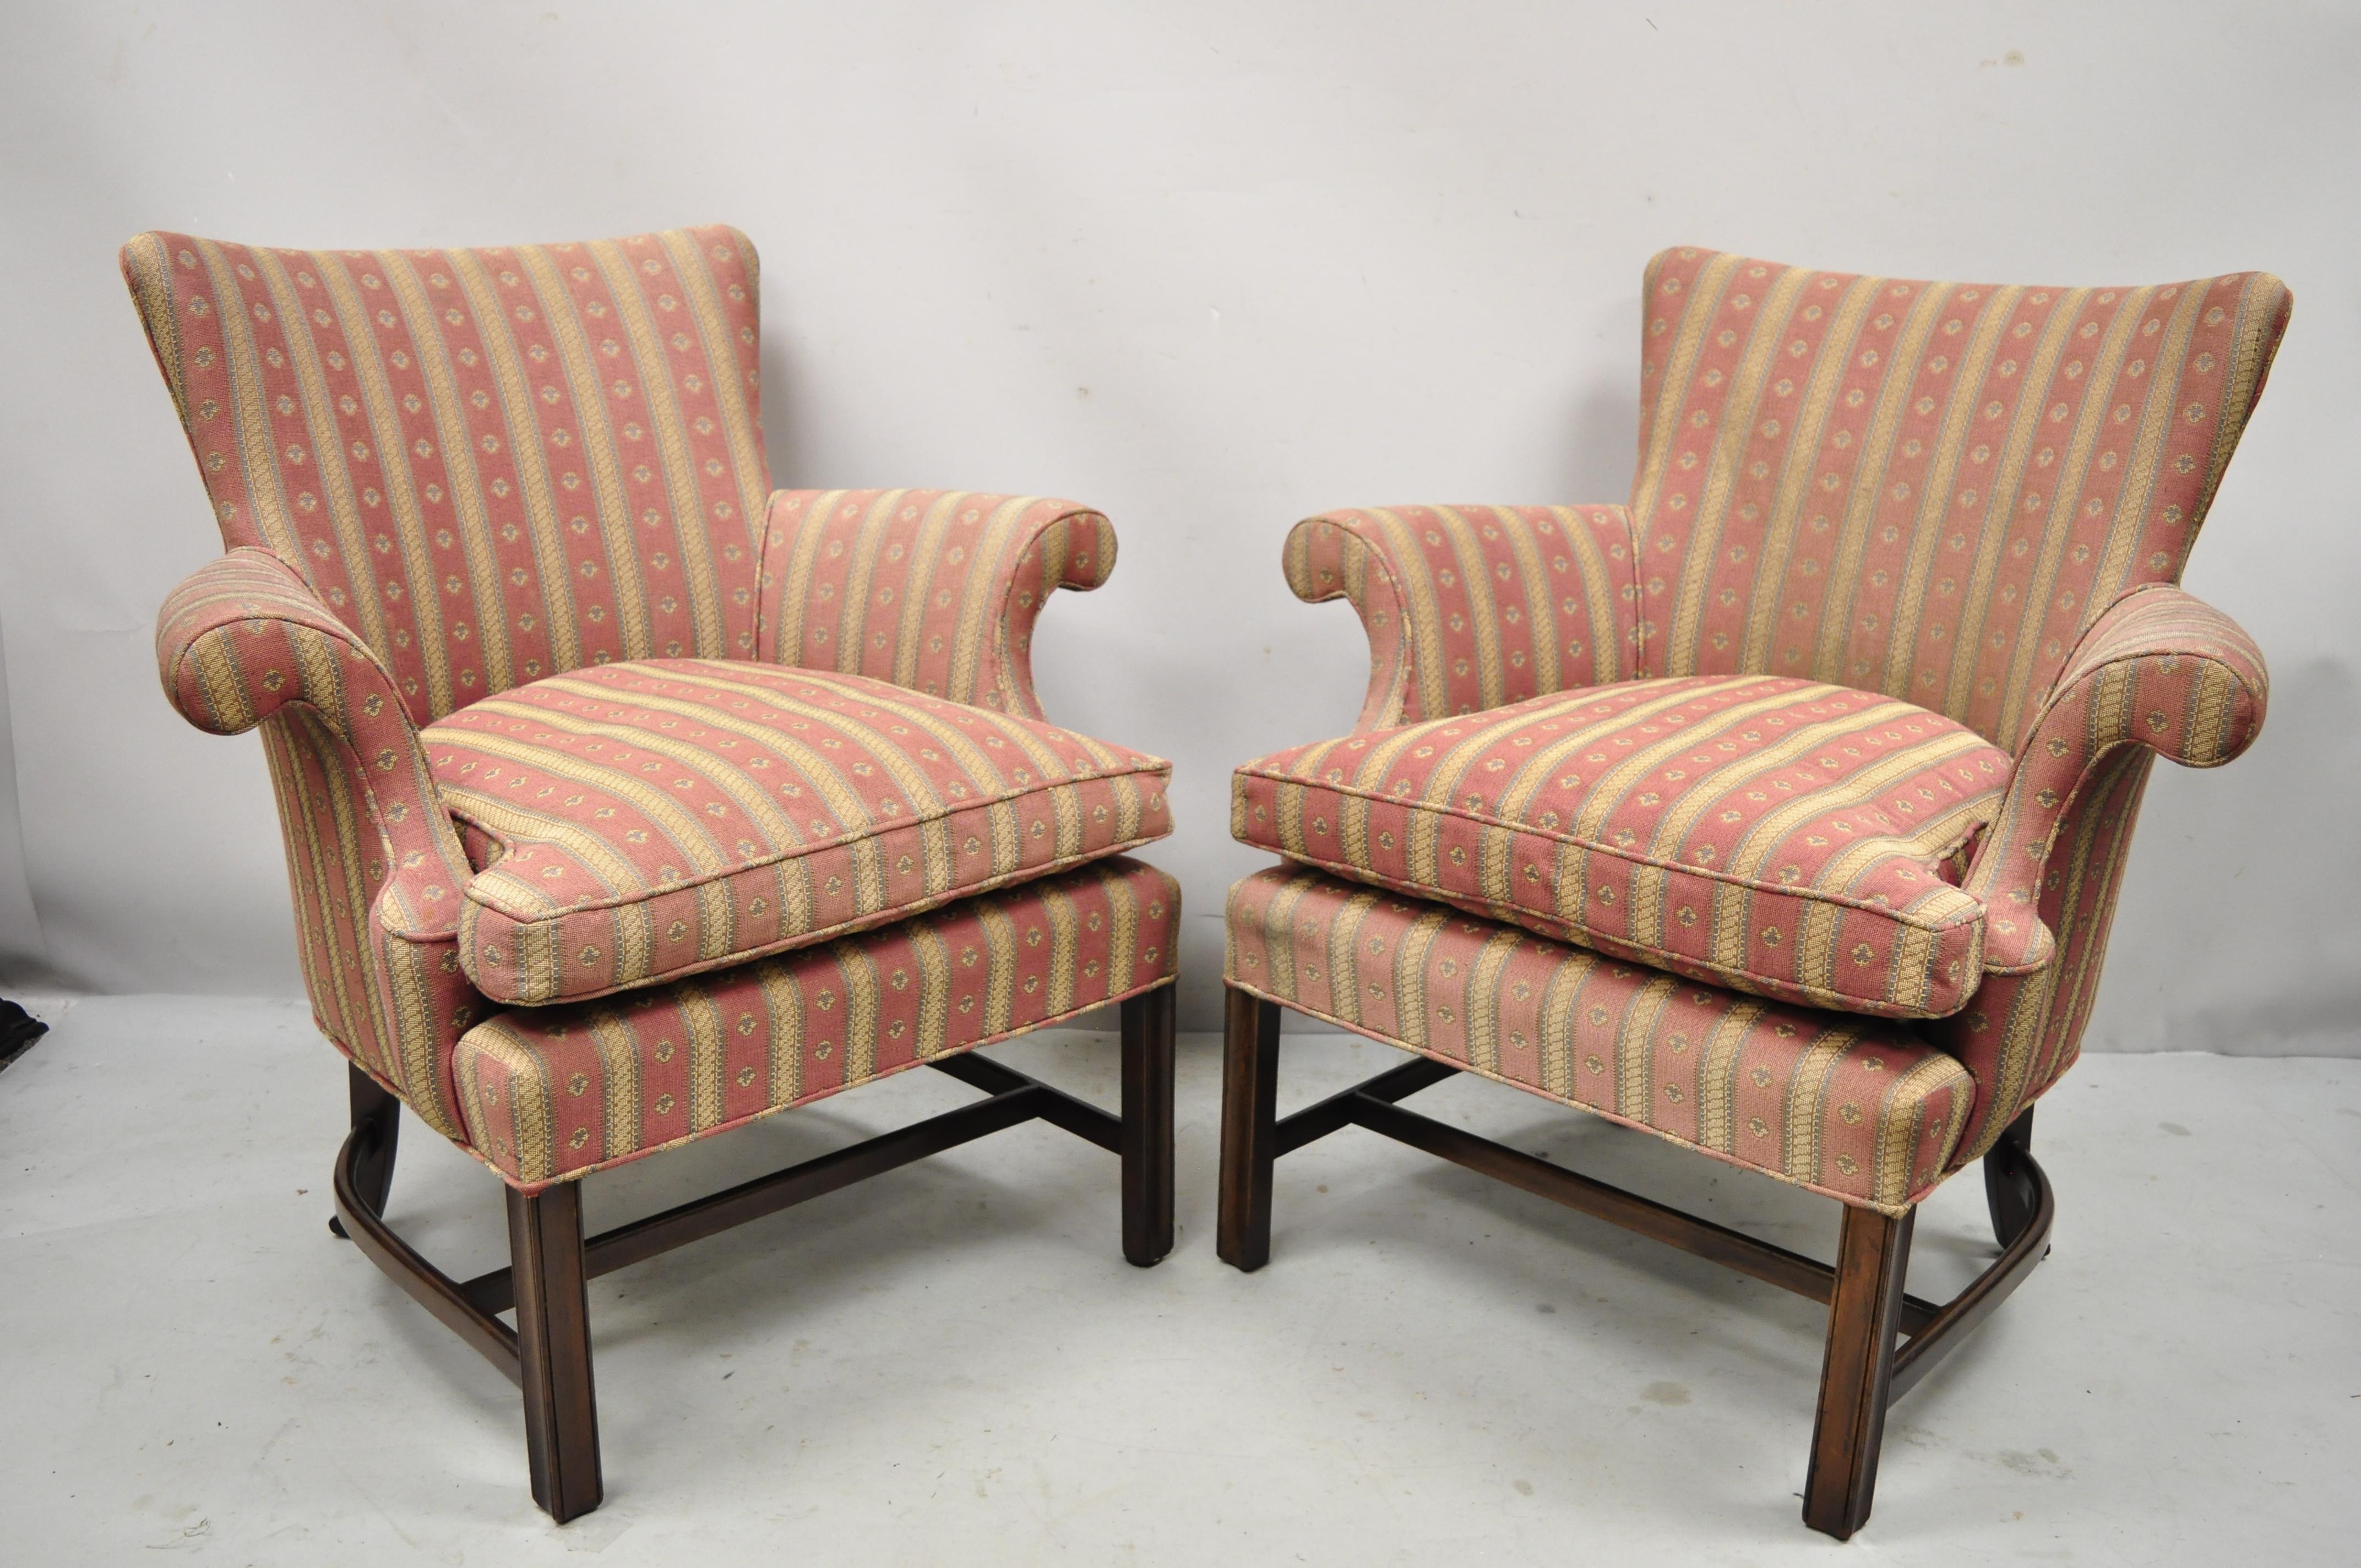 Vintage Southwood mahogany upholstered Chippendale lounge club chairs - a pair. Item features rolled arms, bentwood stretcher base, loose cushion, solid wood frames, quality American craftsmanship great style and form. Circa mid to late 20th